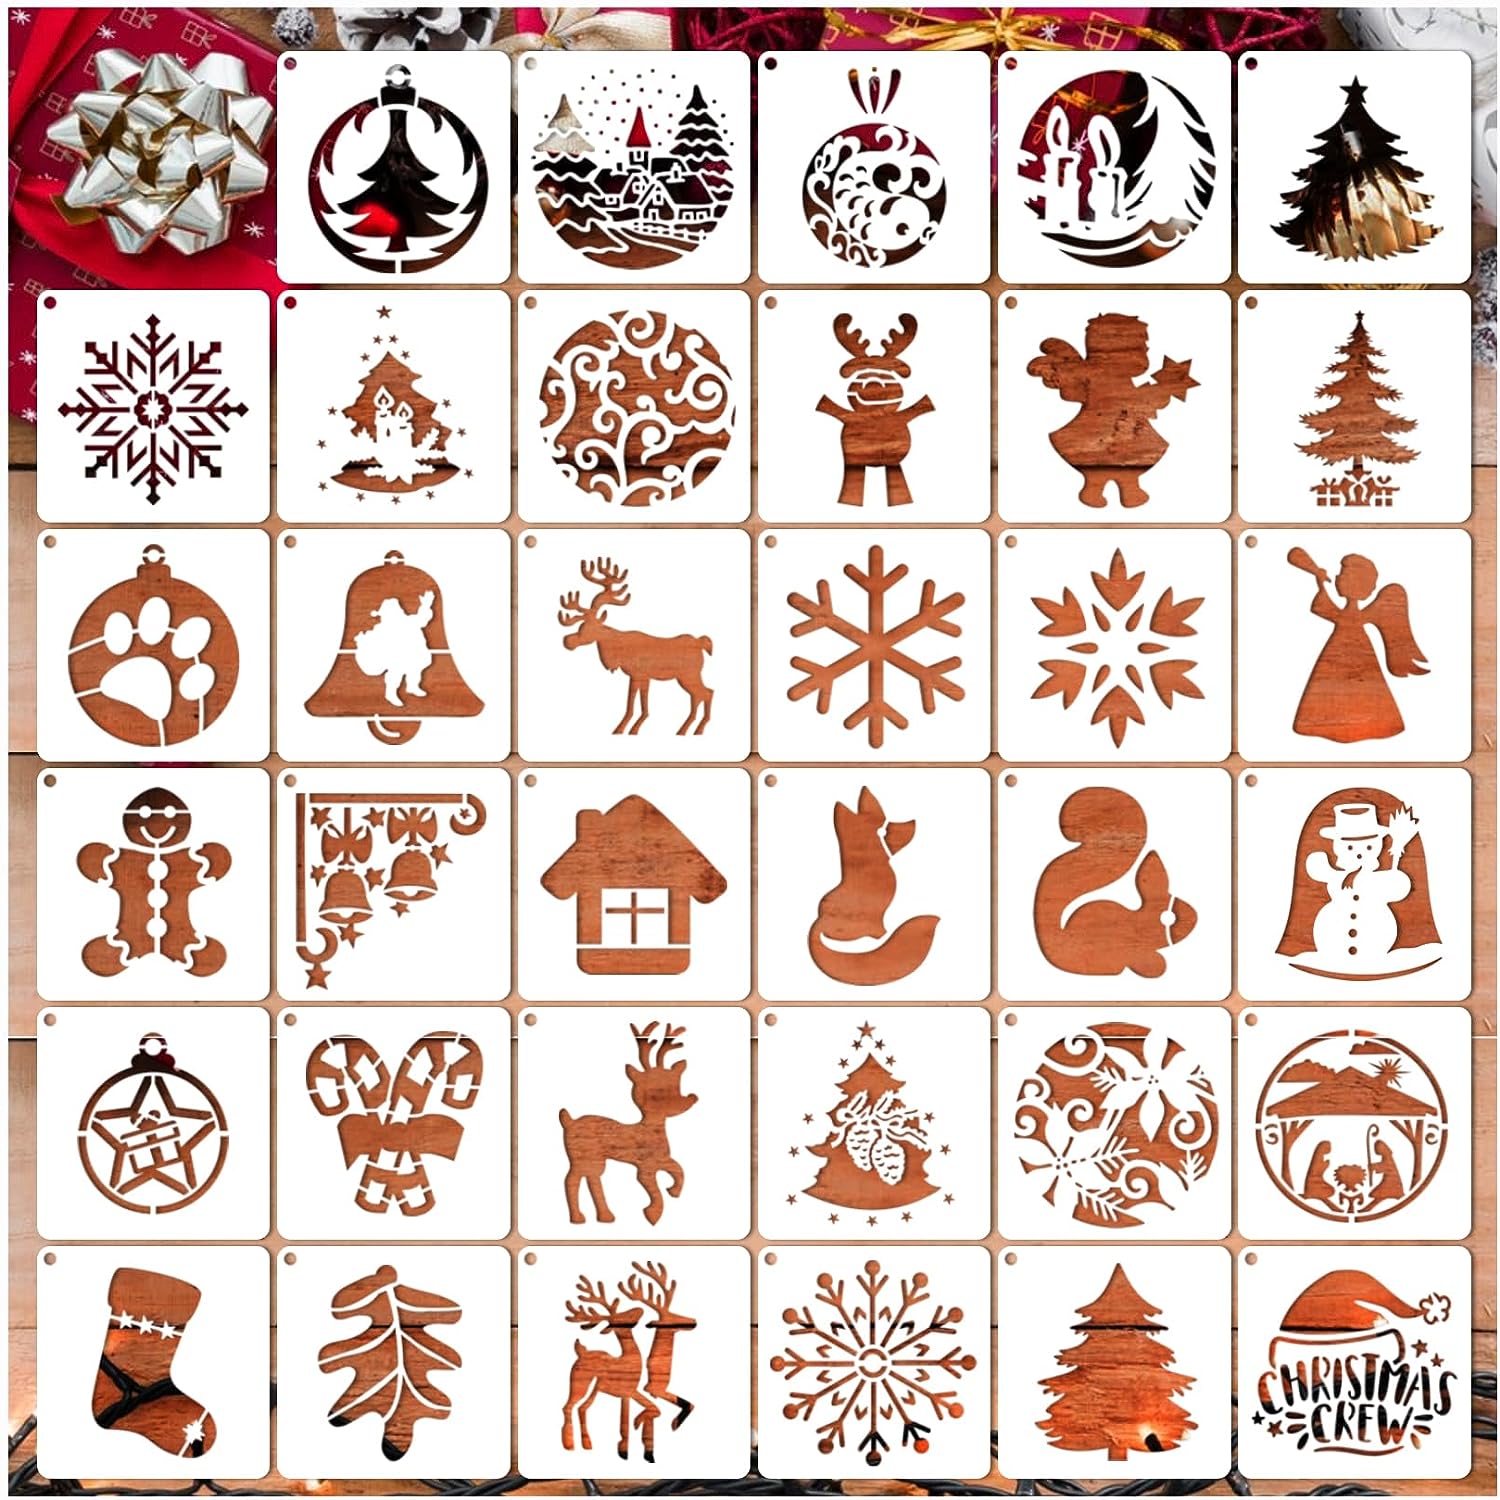 RINOLY 8Pcs Christmas Stencils for Painting on Wood,10 X 10 Inch Reusable  Christmas Stencils, Holiday Stencils for Making Wood Signs or Crafts